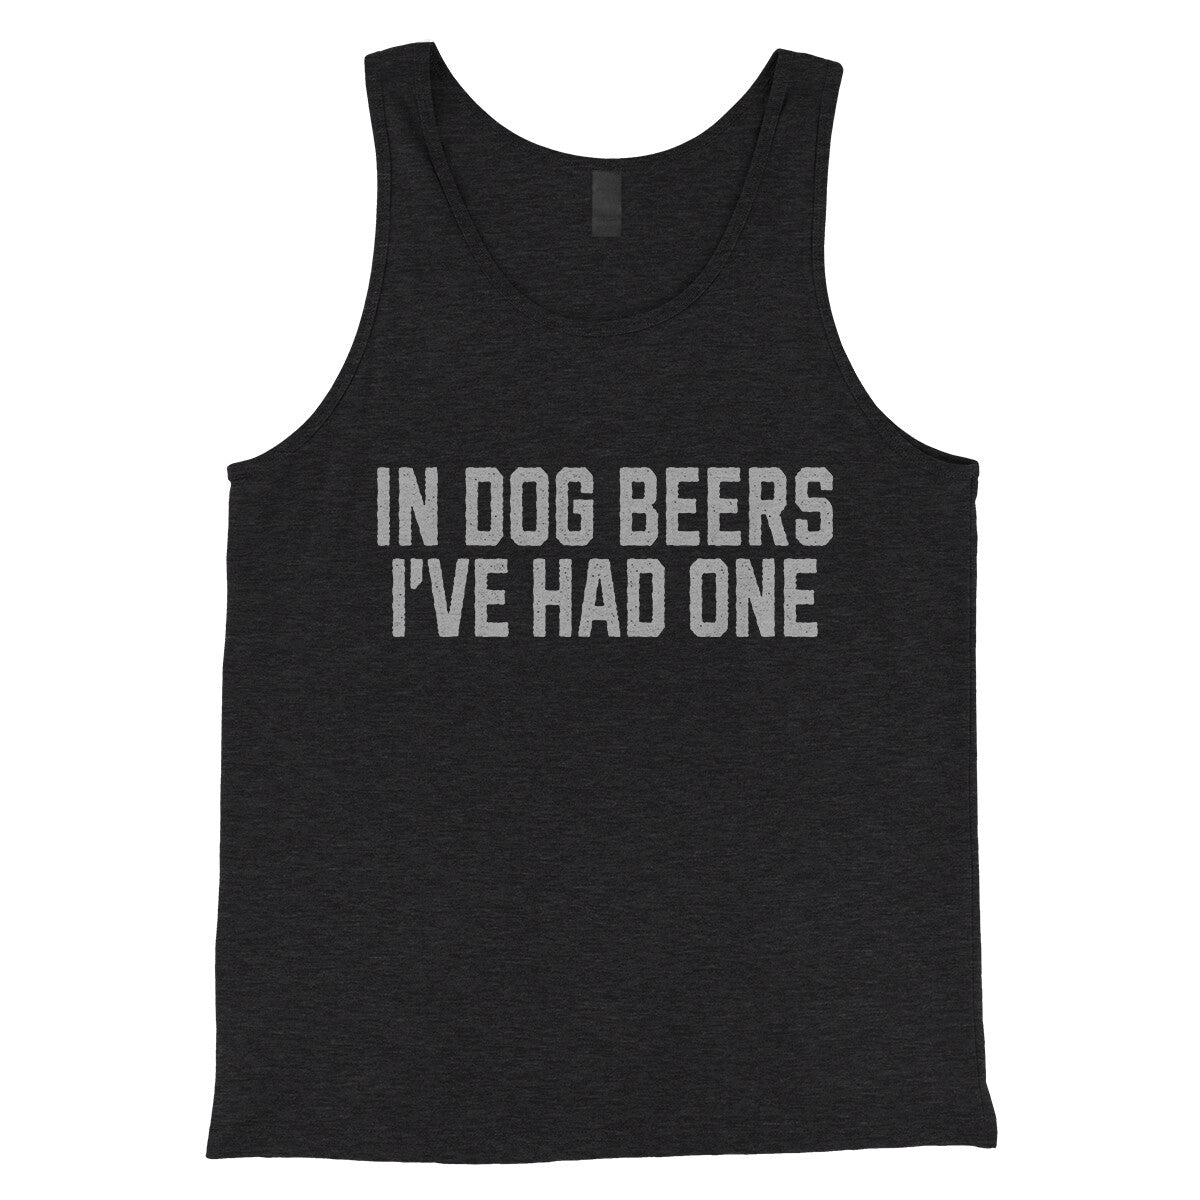 In Dog Beers I've Had One in Charcoal Black TriBlend Color